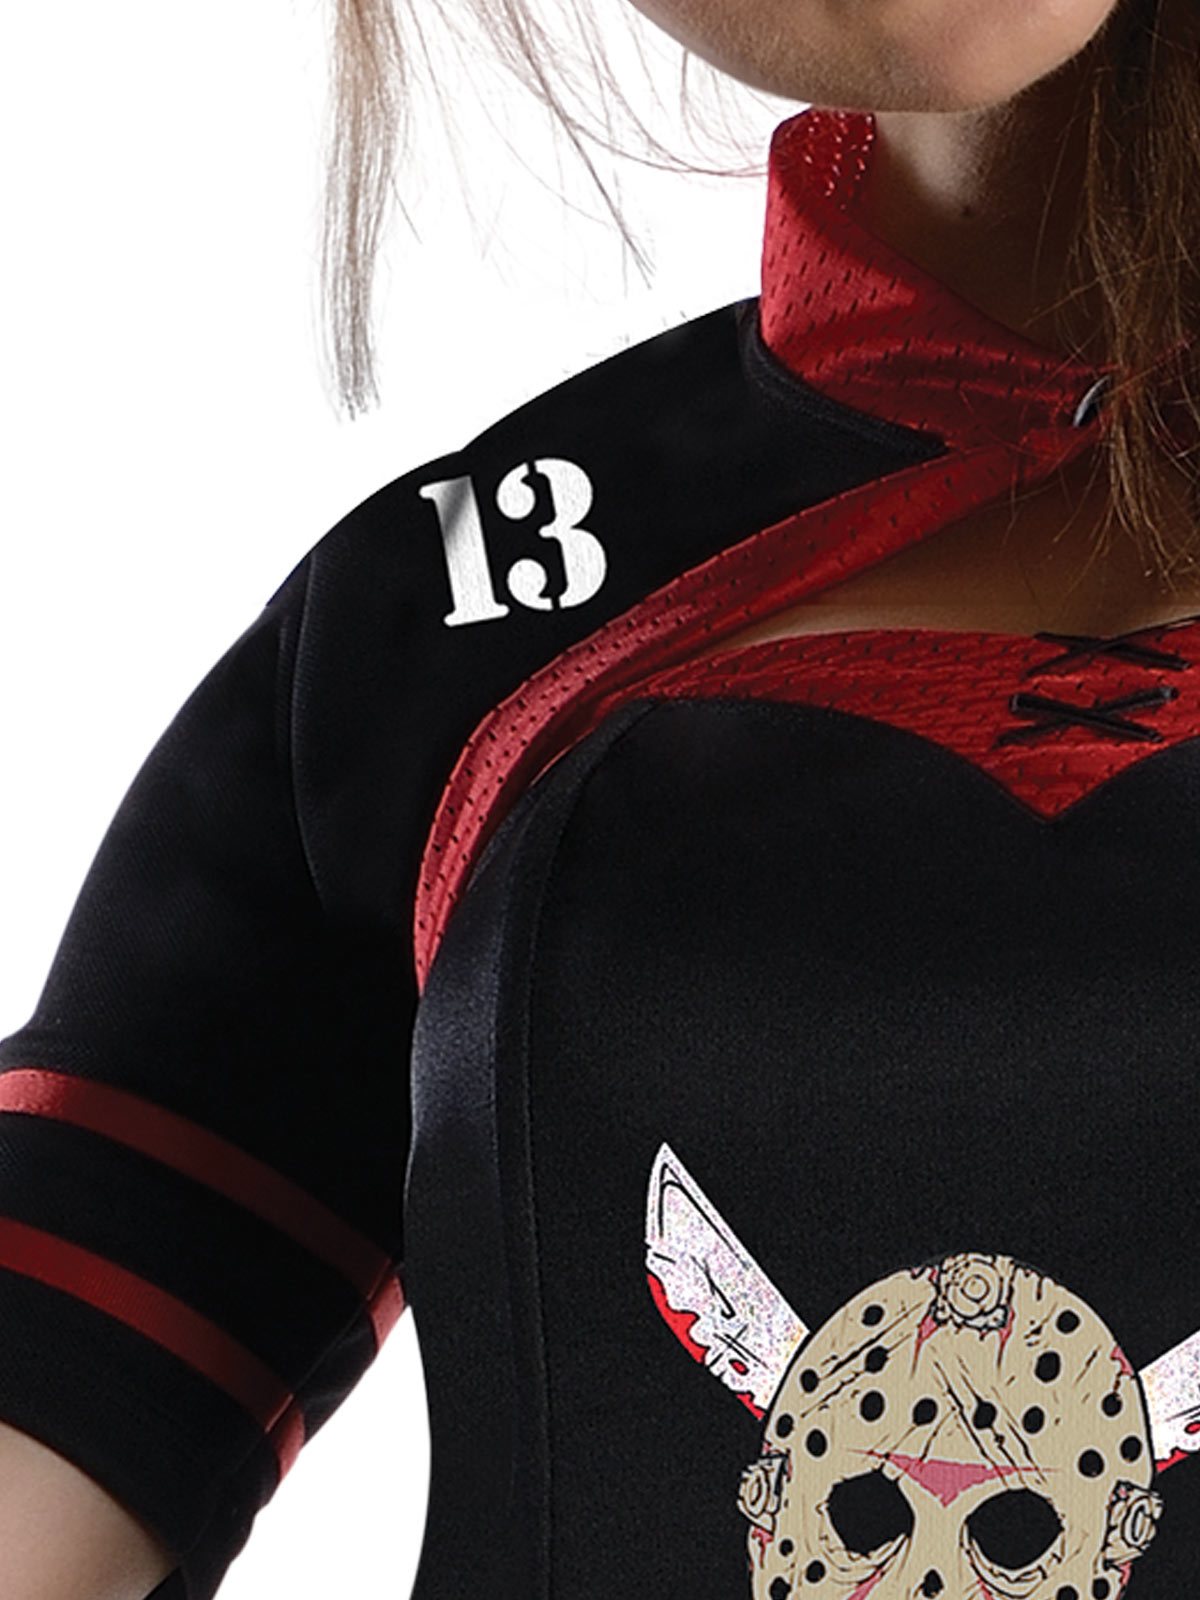 Jason Voorhees Cheerleader Costume for Adults - Friday the 13th ...